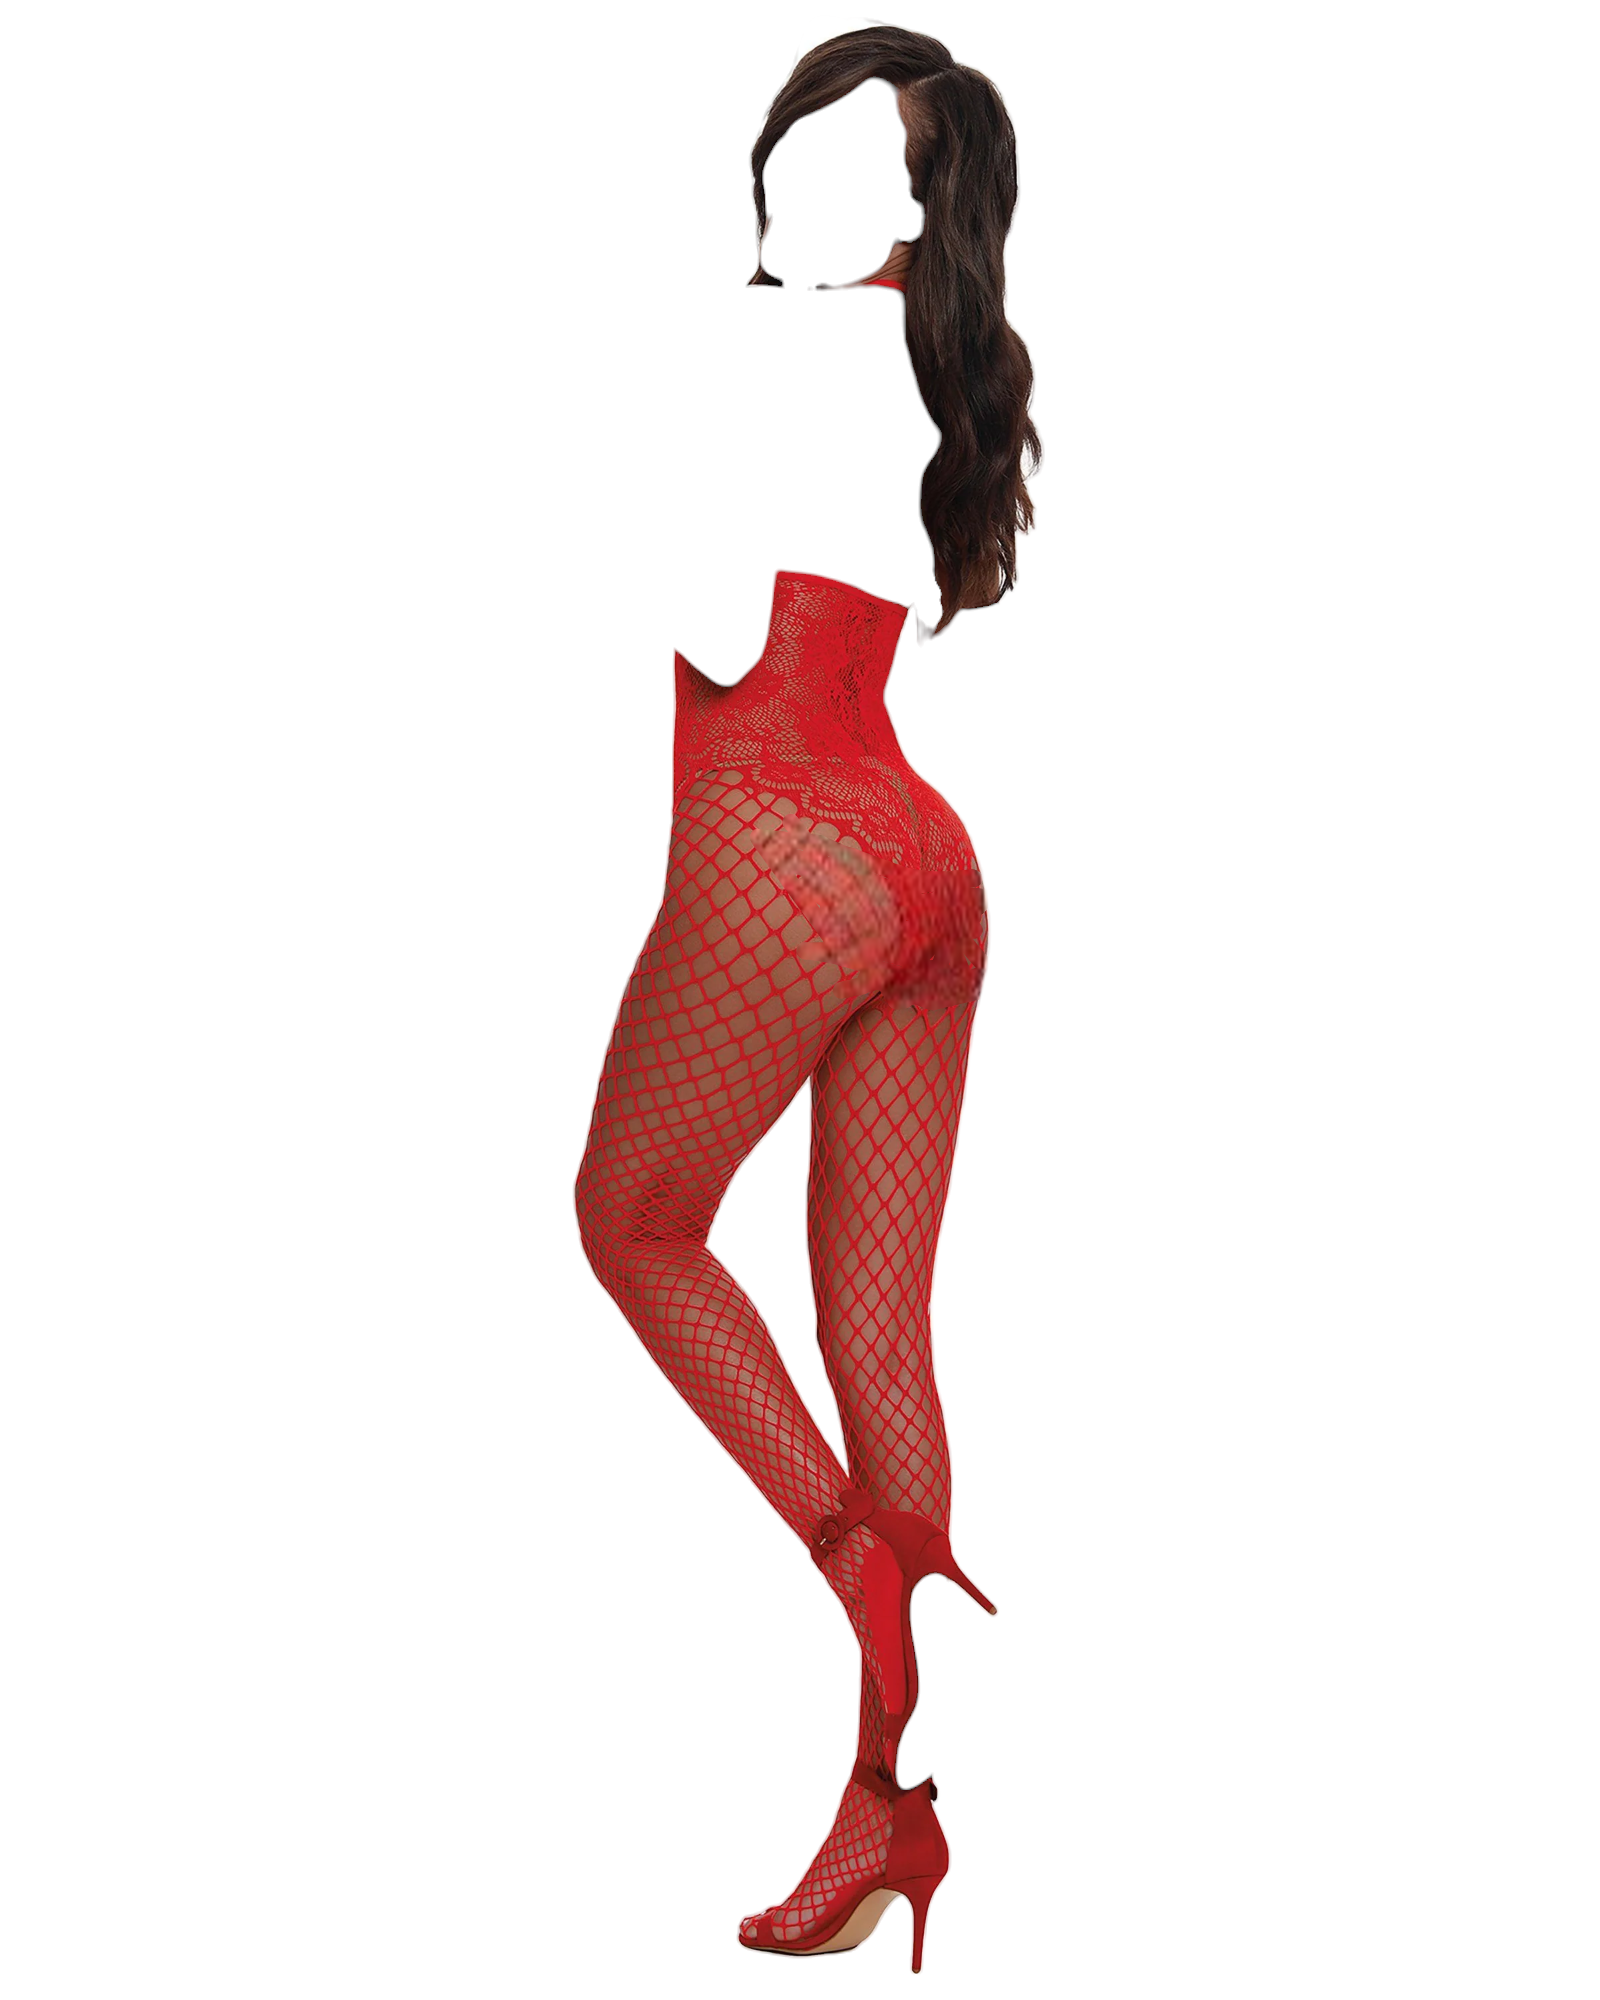 Dreamgirl Open-Cup Bodystocking with Lace Teddy Fishnet Legs & Open Crotch Red